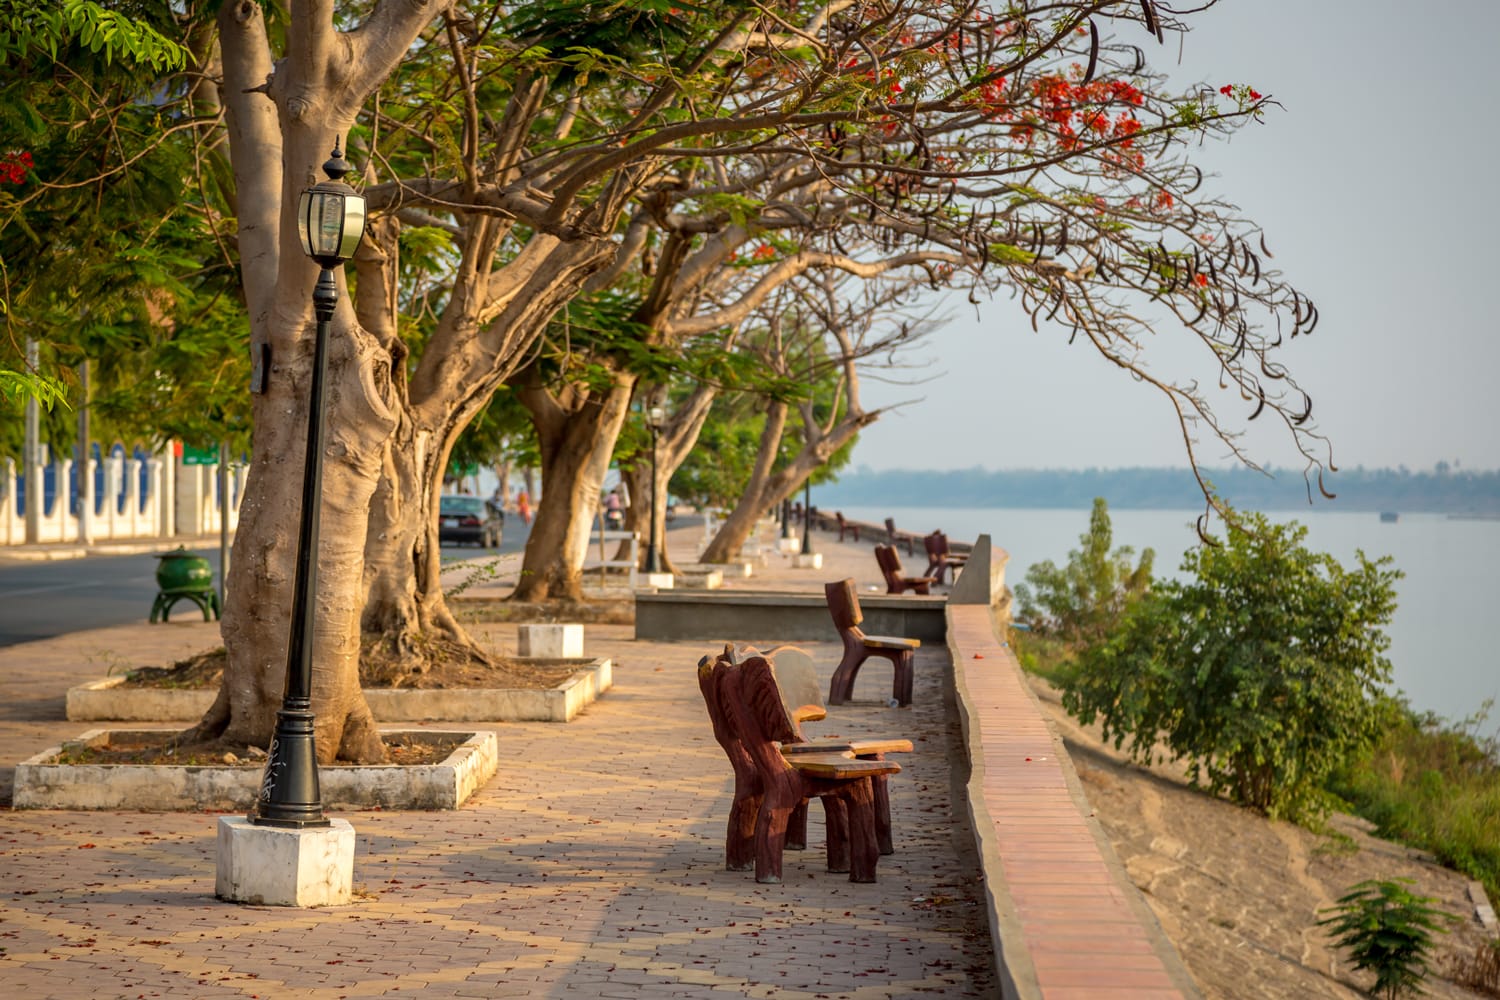 Nice open area in front of the Mekong River in Kratie City, northern of Cambodia.